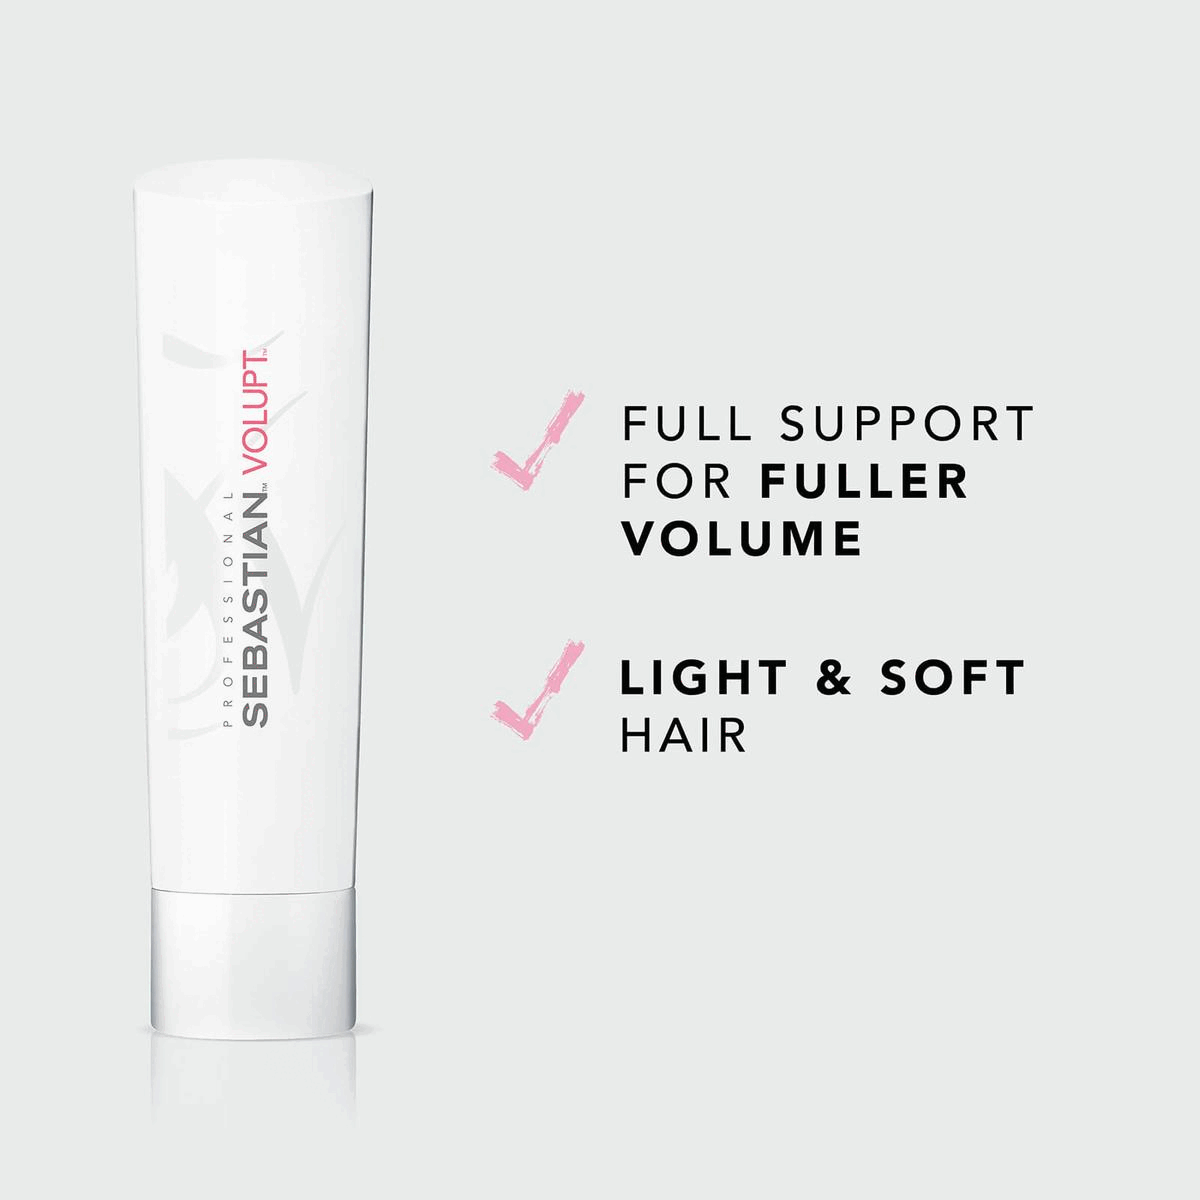 Full support for fuller volume Light & soft hair. How to use Remove excess water Distribute through the hair Rinse thoroughly. Natural bamboo extract. Combine with Volupt shampoo & volupt spray for best results. Complete your routine* *sold separately. Complete your routine* *sold separately